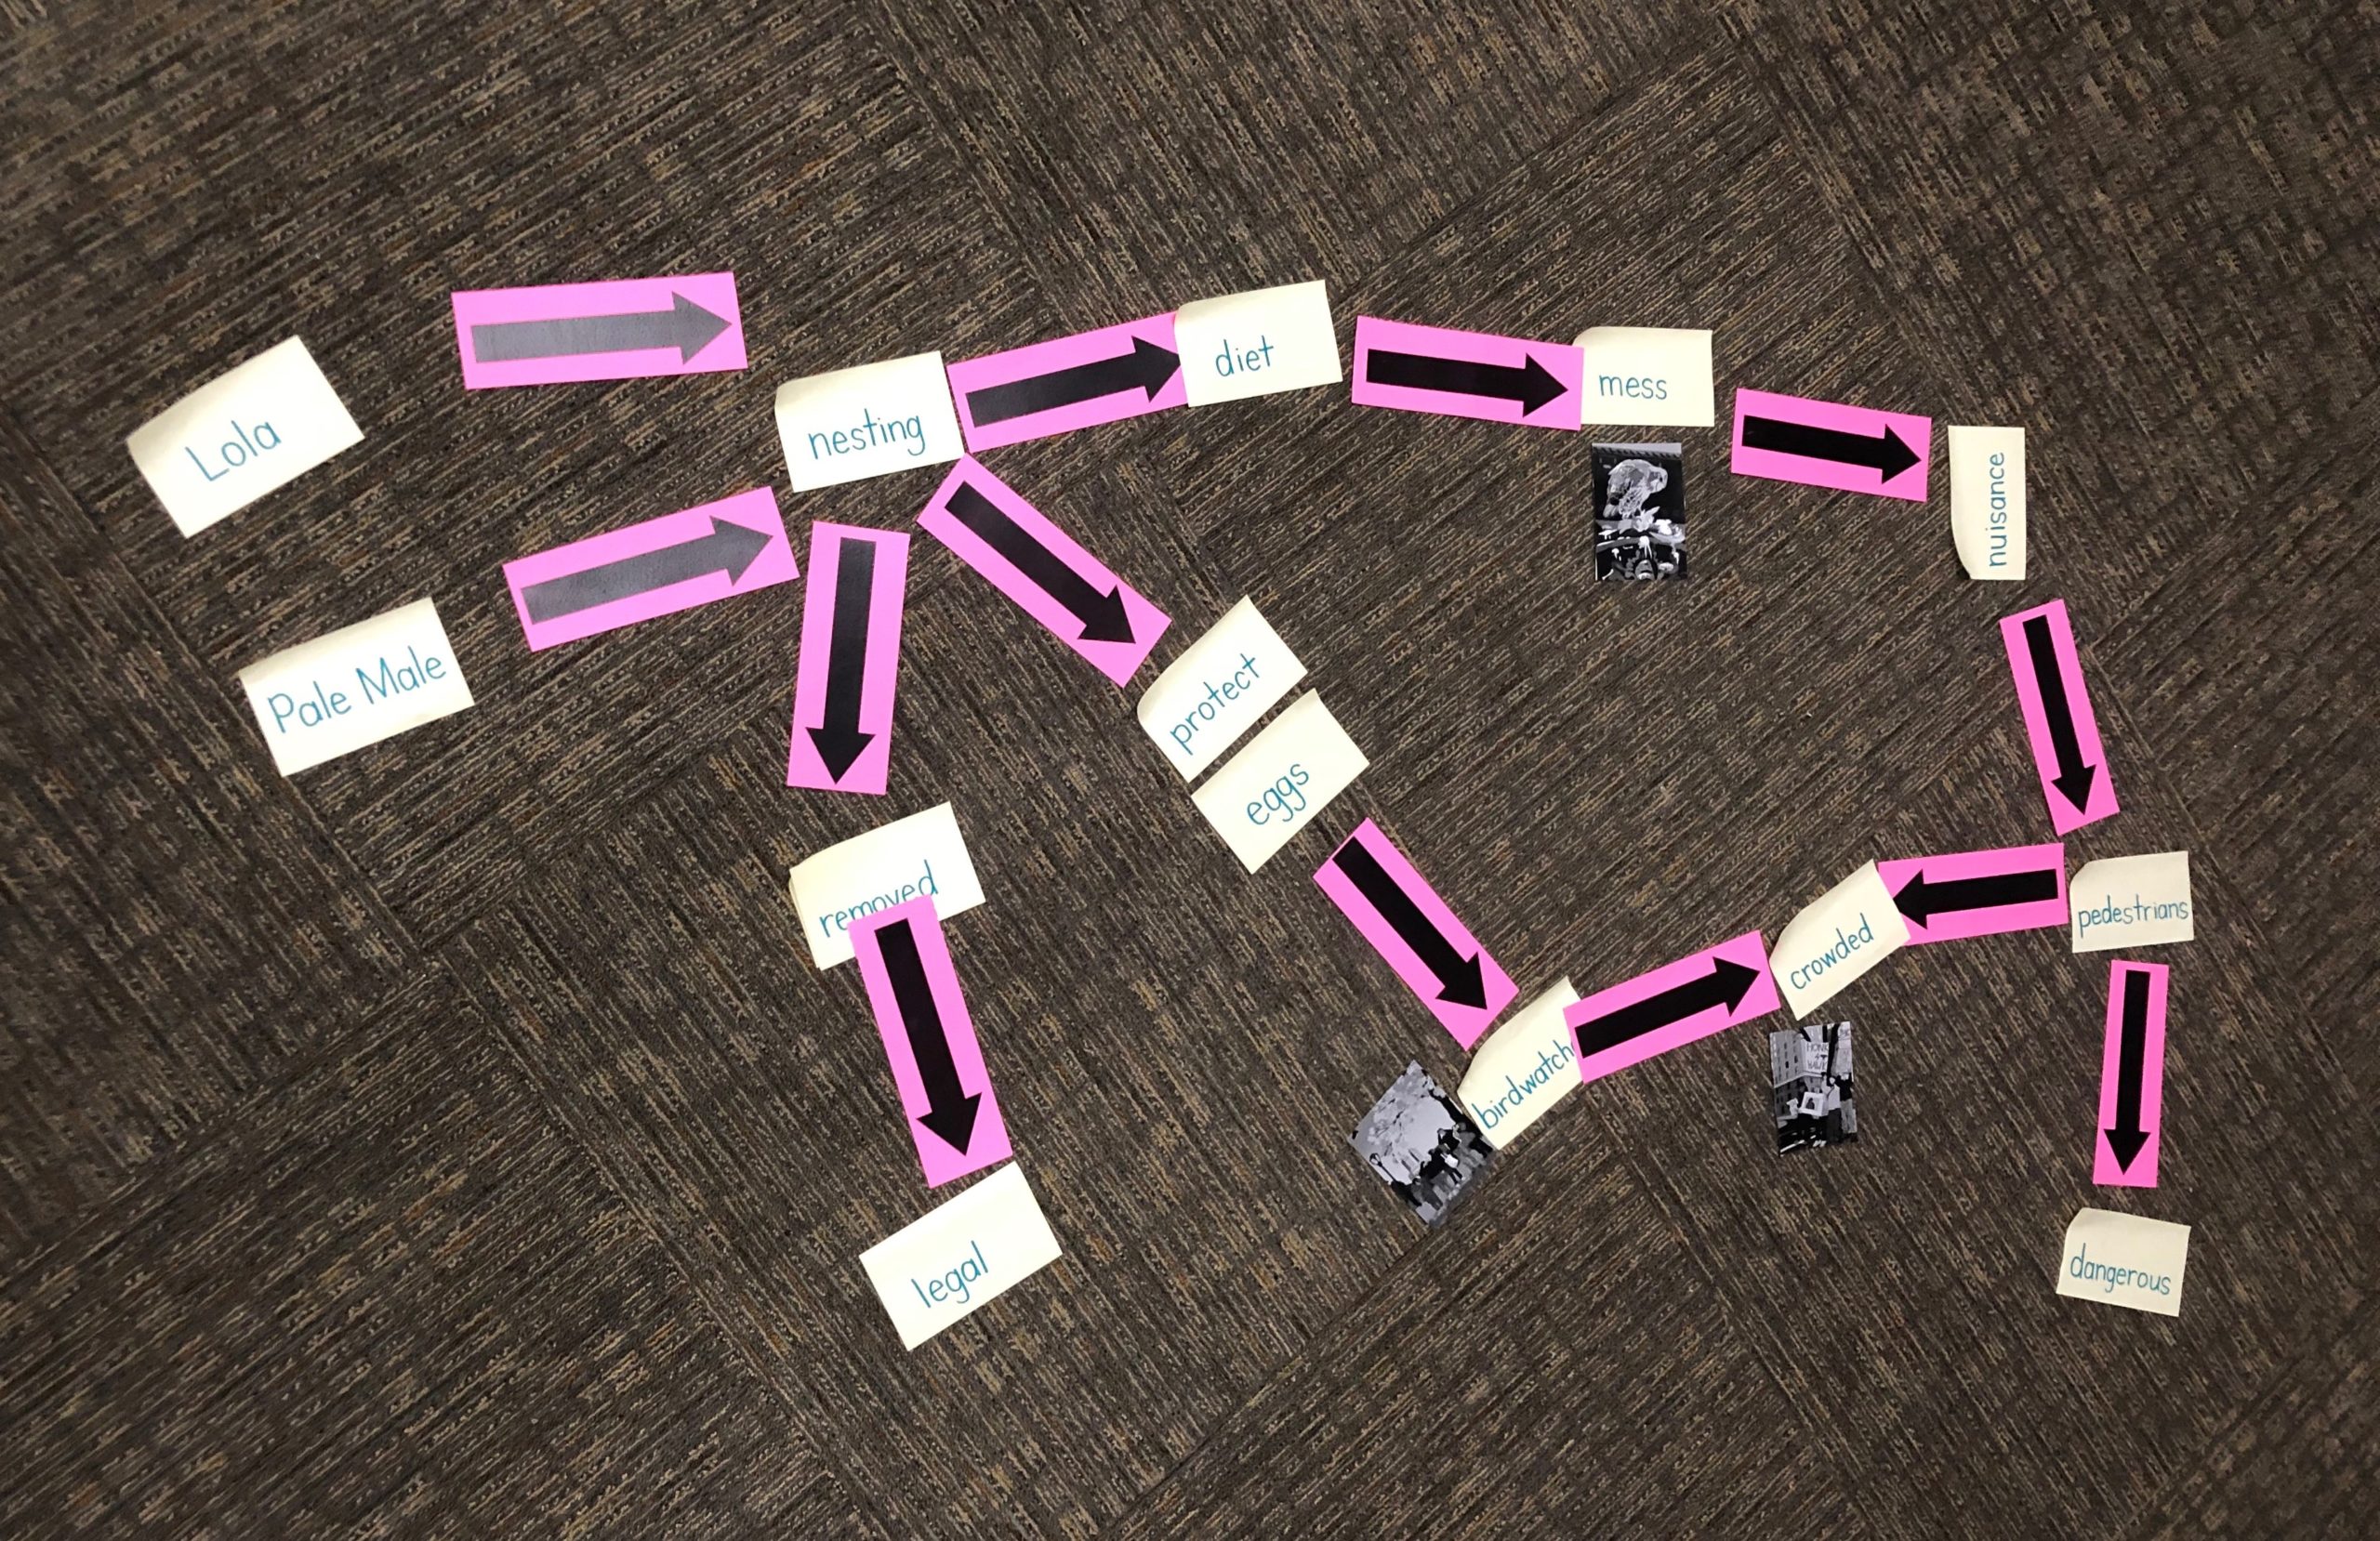 vocabulary words on sticky notes with purple arrows on ground